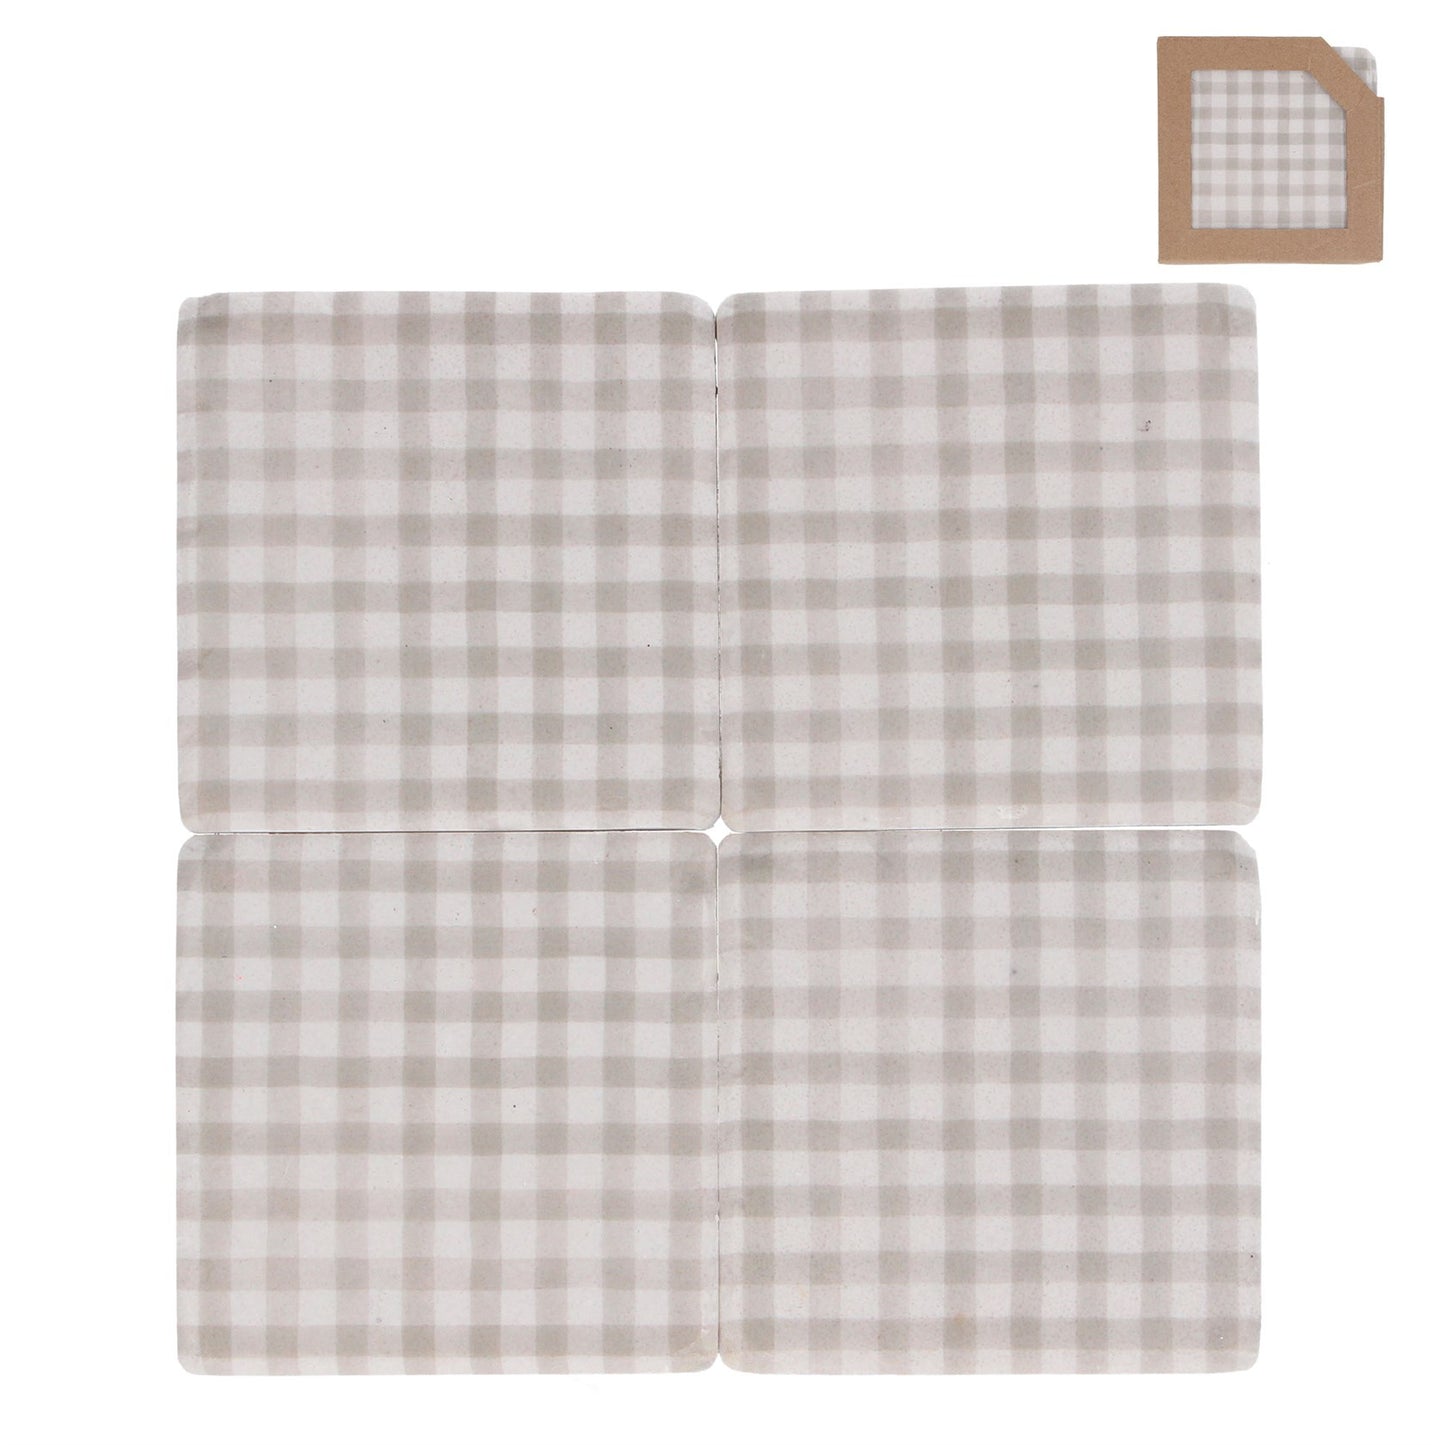 Natural Gingham Coasters - Set of Four